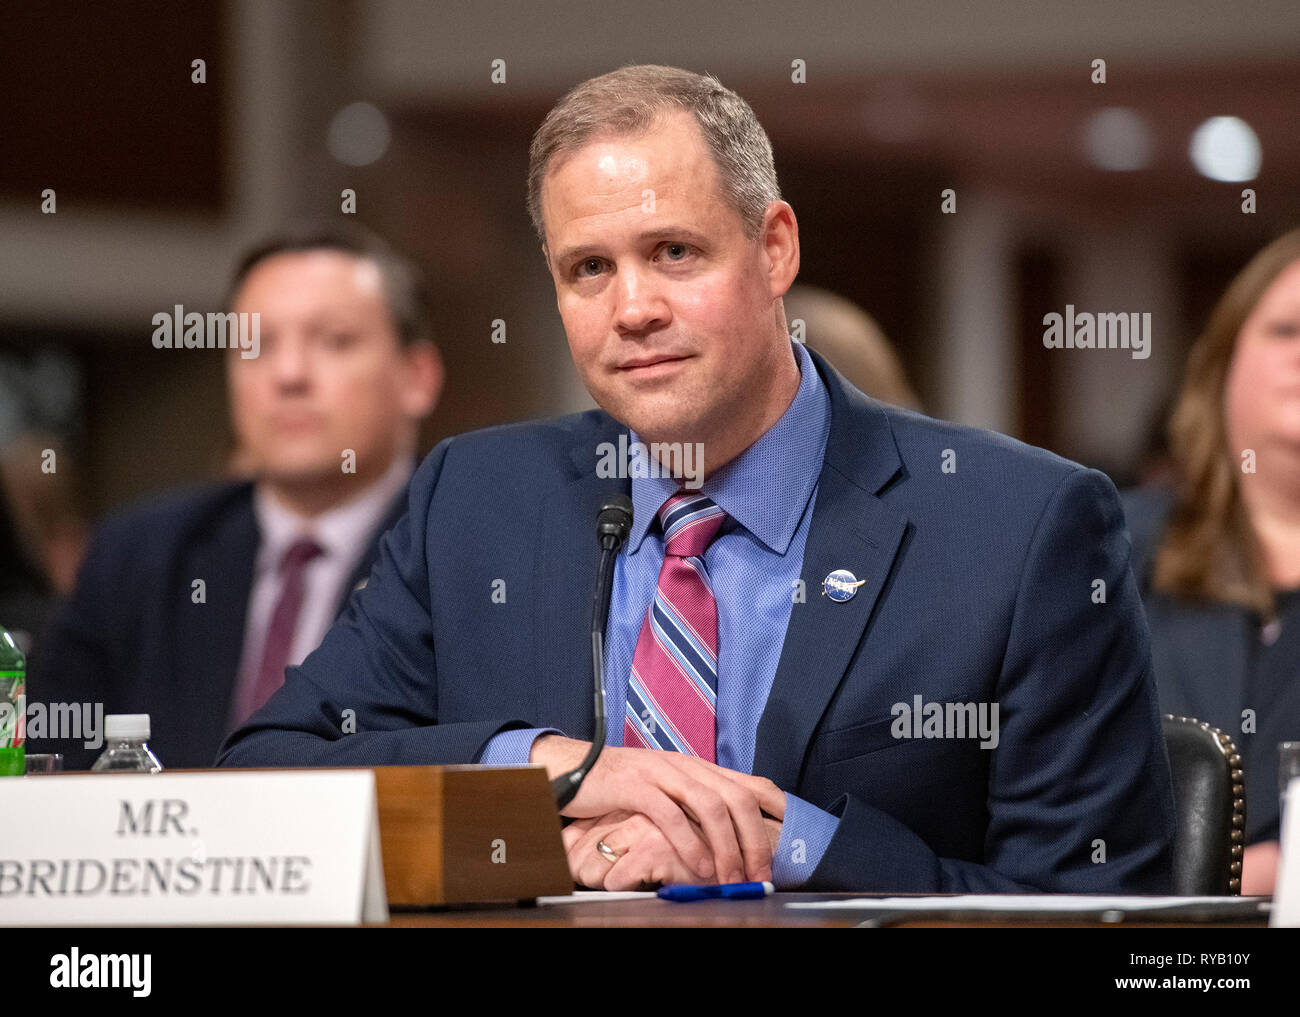 Jim Bridenstine, Administrator, National Aeronautics and Space Administration, testifies before the United States Senate Committee on Commerce, Science, and Transportation on 'The New Space Race: Ensuring U.S. Global Leadership on the Final Frontier' on Capitol Hill in Washington, DC on Wednesday, March 13, 2019. Credit: Ron Sachs / CNP | usage worldwide Stock Photo